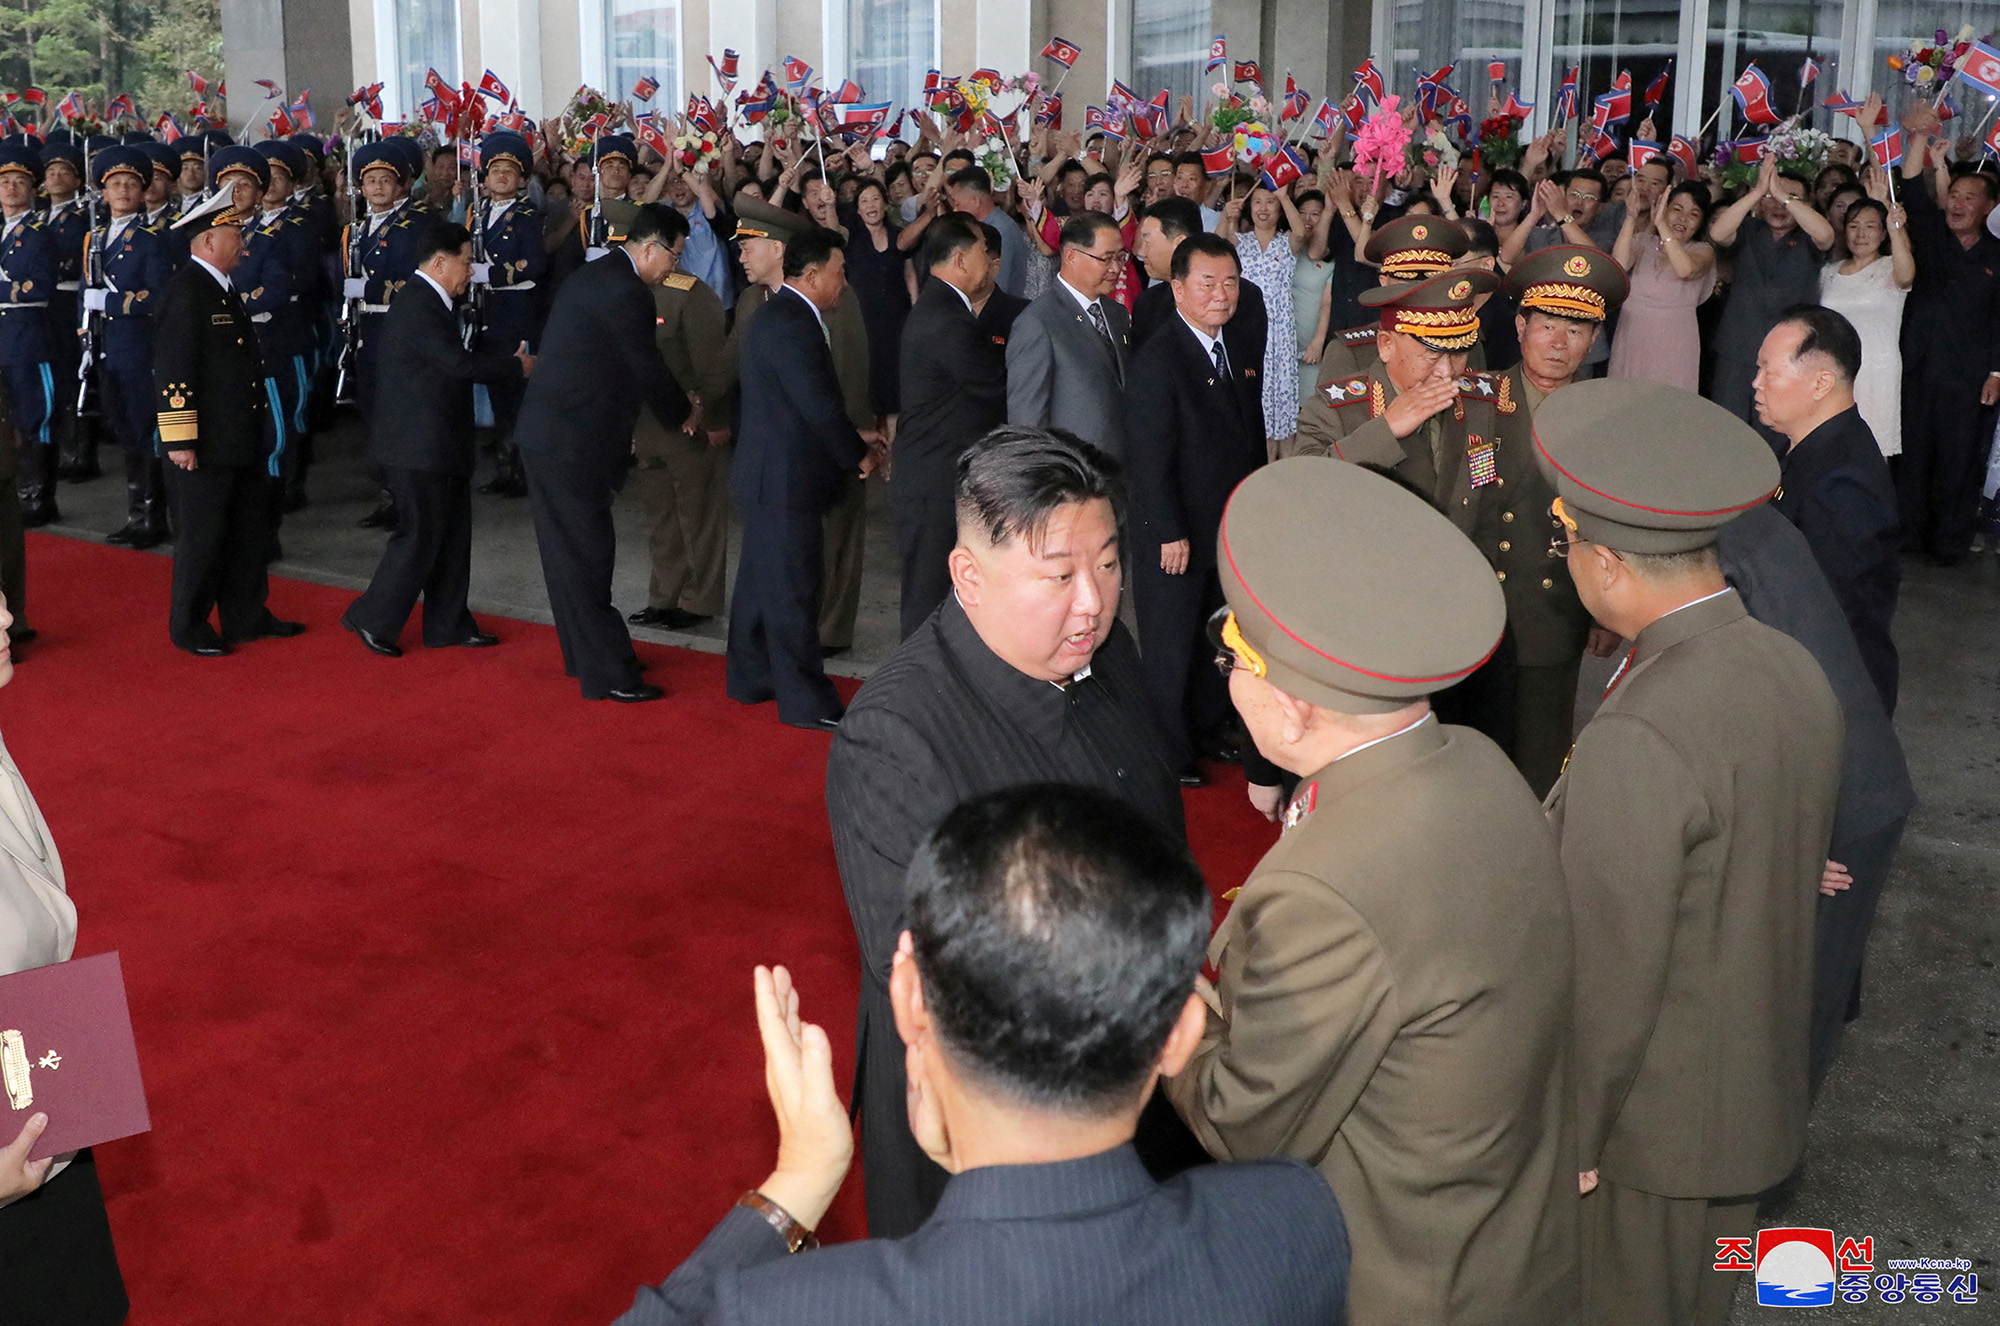 North Korean leader Kim Jong Un, center, accompanied by Ri Pyong Chol, vice chairman of the ruling Workers' Party's Central Military Commission, Pak Jong Chon, the new head of the party's military-political leadership, Su Yong, party secretary and director of the economy department, Pak Thae Song, party secretary and chairman of a national space science and technology committee, depart Pyongyang, North Korea, to visit Russia, on September 10, in this handout image. 